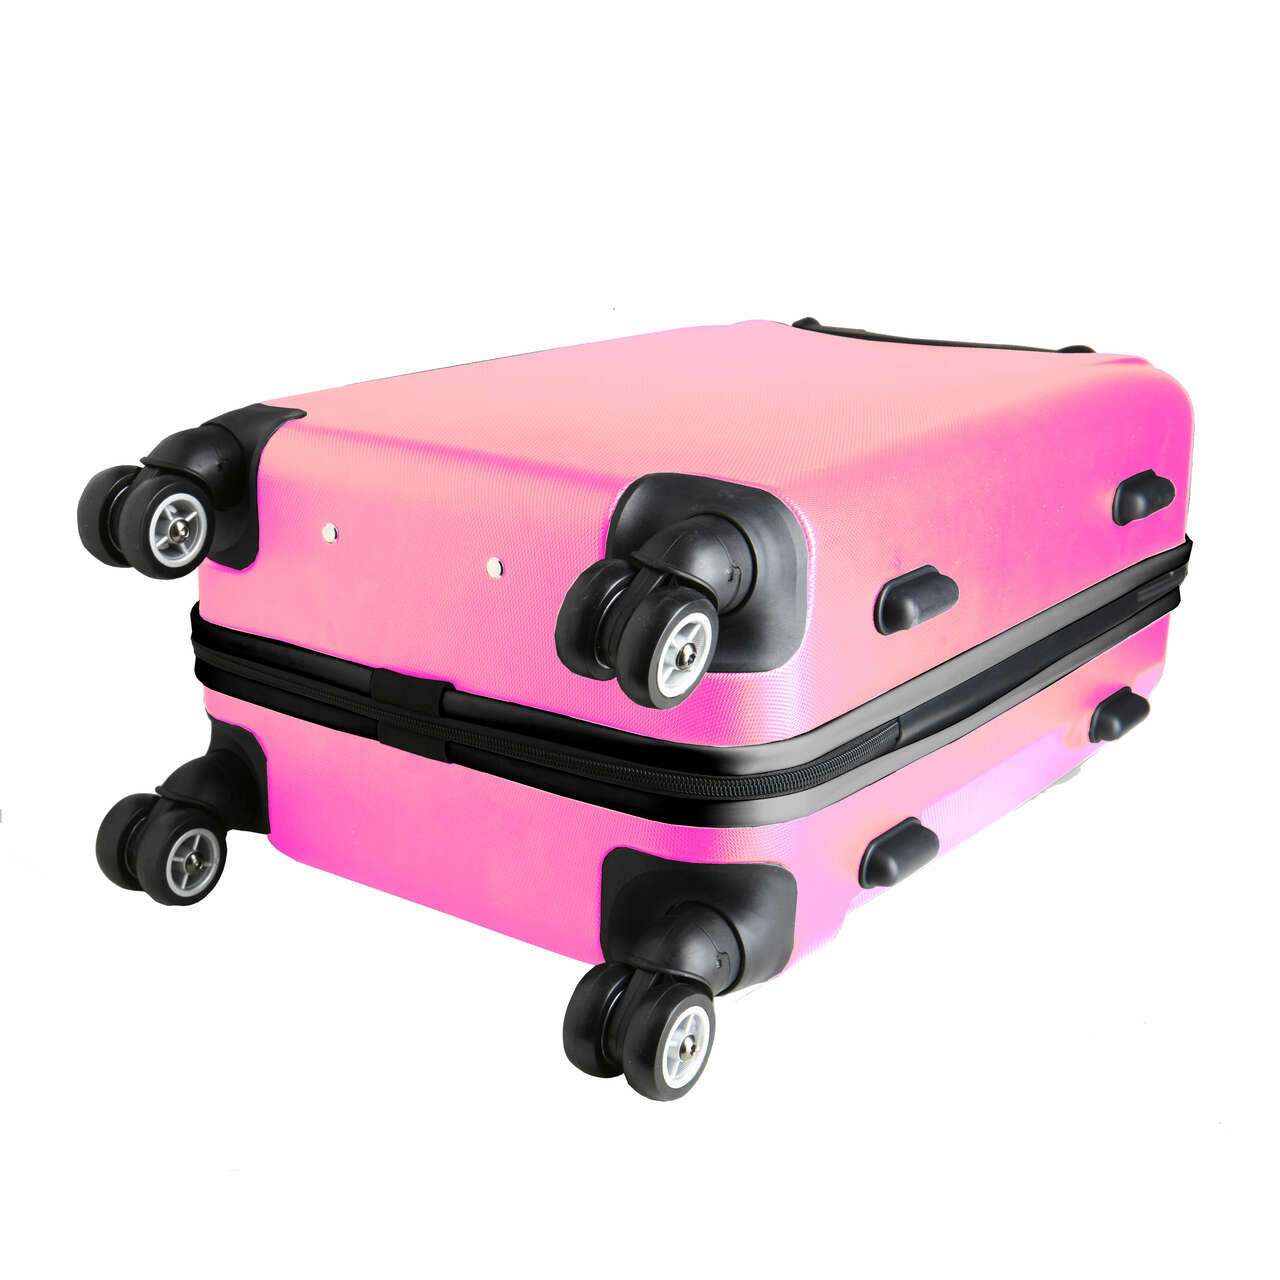 Denver Nuggets 20" Pink Domestic Carry-on Spinner